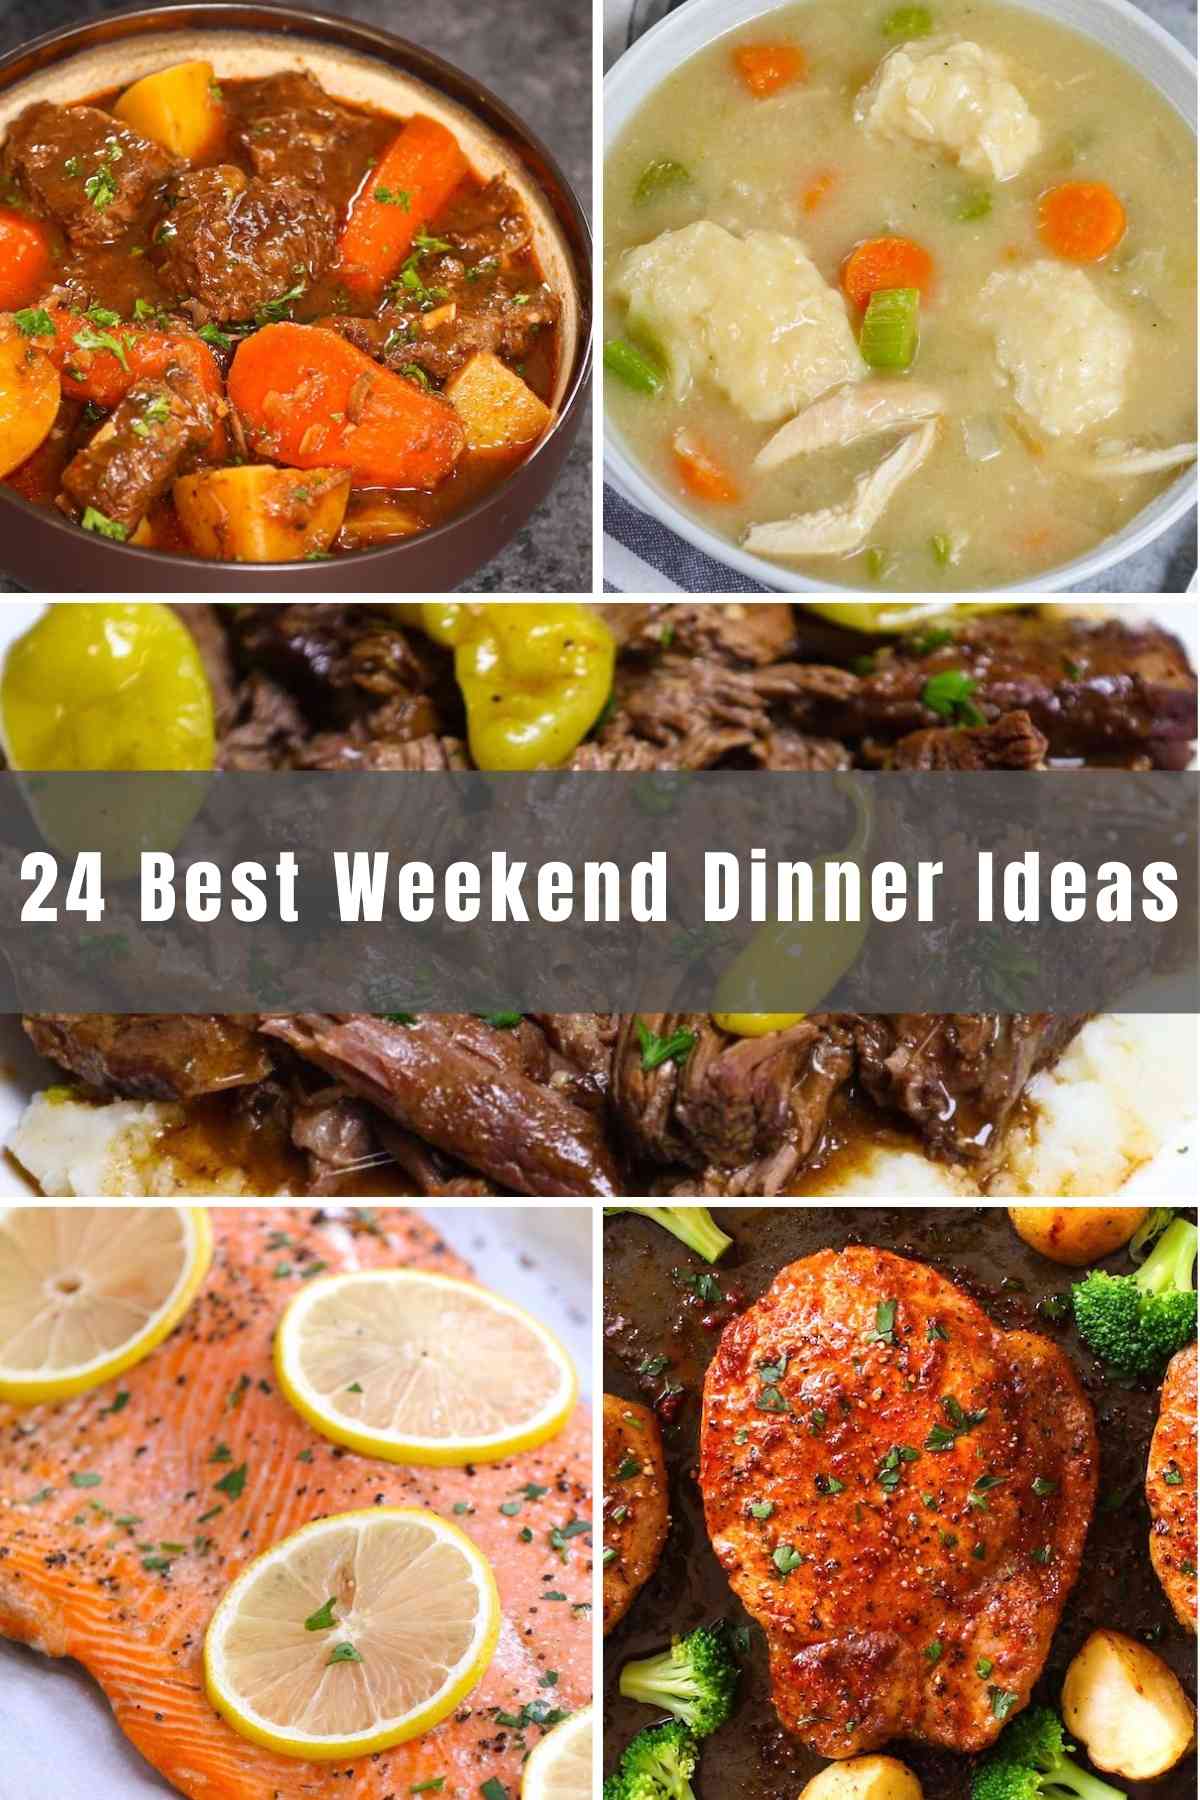 It’s the weekend which means you can kick back, relax, and have some fun! We’ve collected 24 of the Best Weekend Dinner Ideas for the family to gather around the table and enjoy some quality time. Whether you’re cooking a delicious Saturday dinner or a lazy Sunday meal, we’ve got you covered.